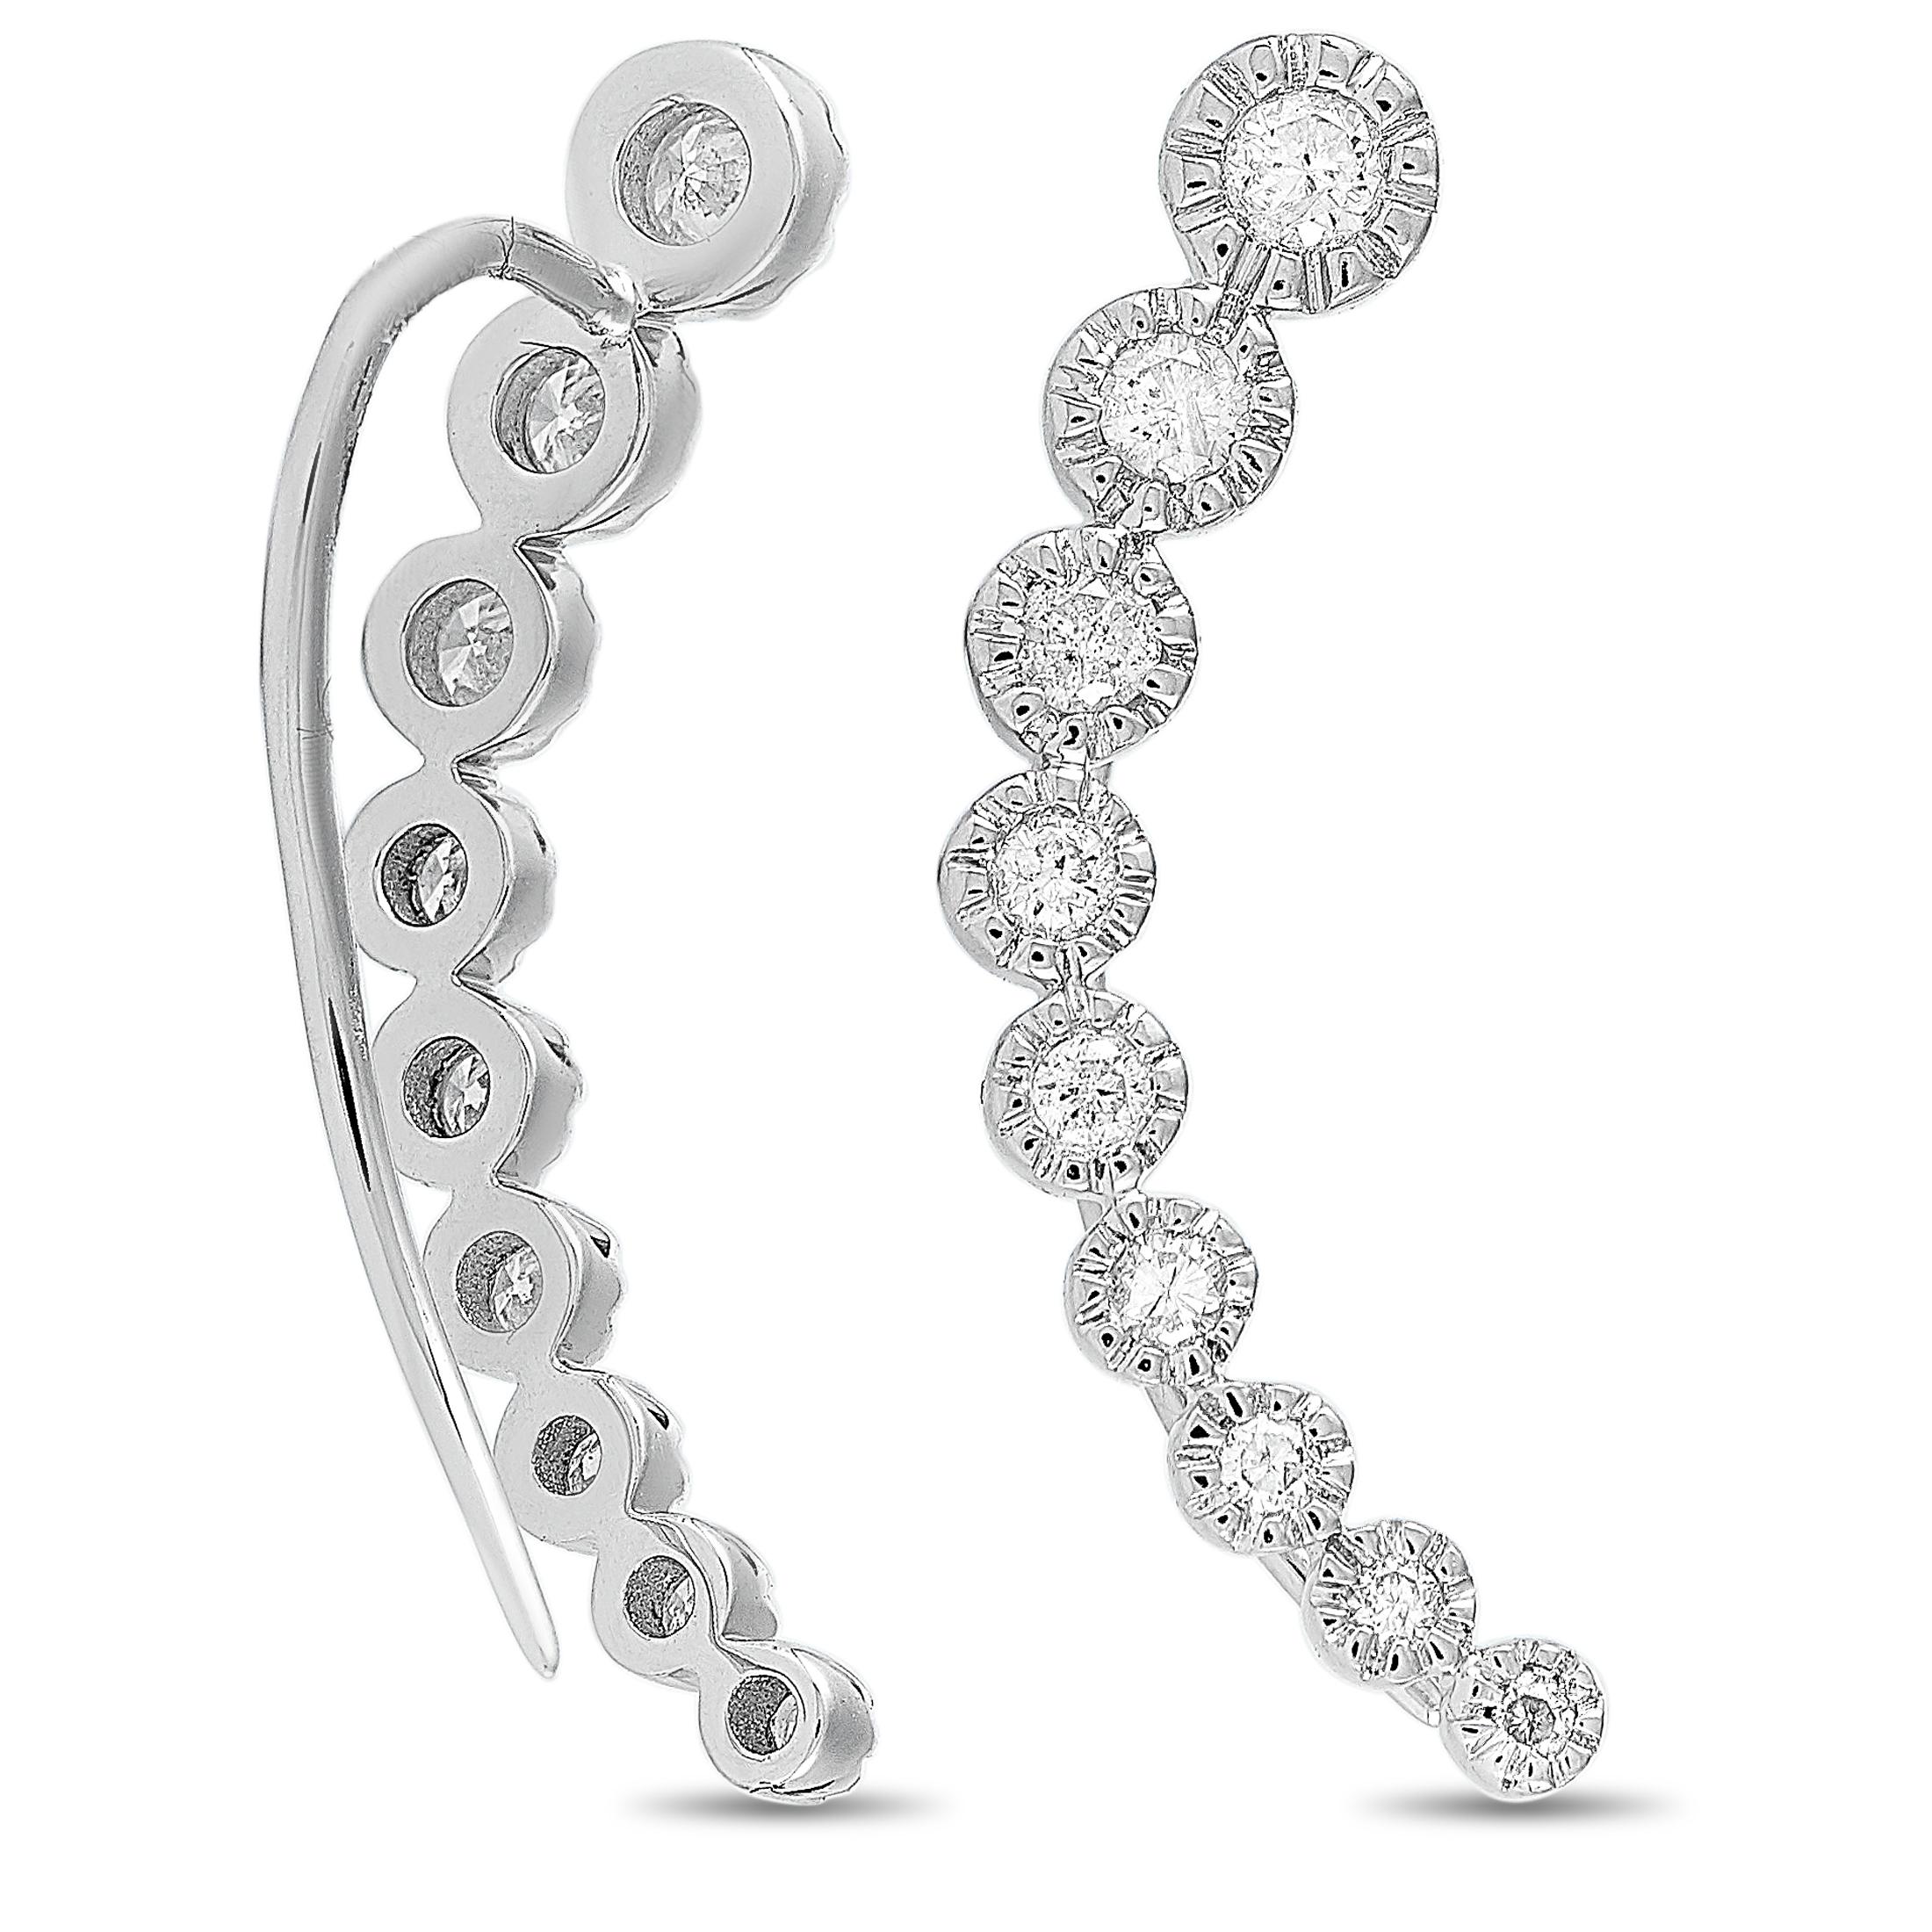 These LB Exclusive climber earrings are made of 14K white gold and embellished with diamonds that amount to 0.50 carats. The earrings measure 1” in length and 0.15” in width, and each of the two weighs 1.35 grams.
 
 The pair is offered in brand new